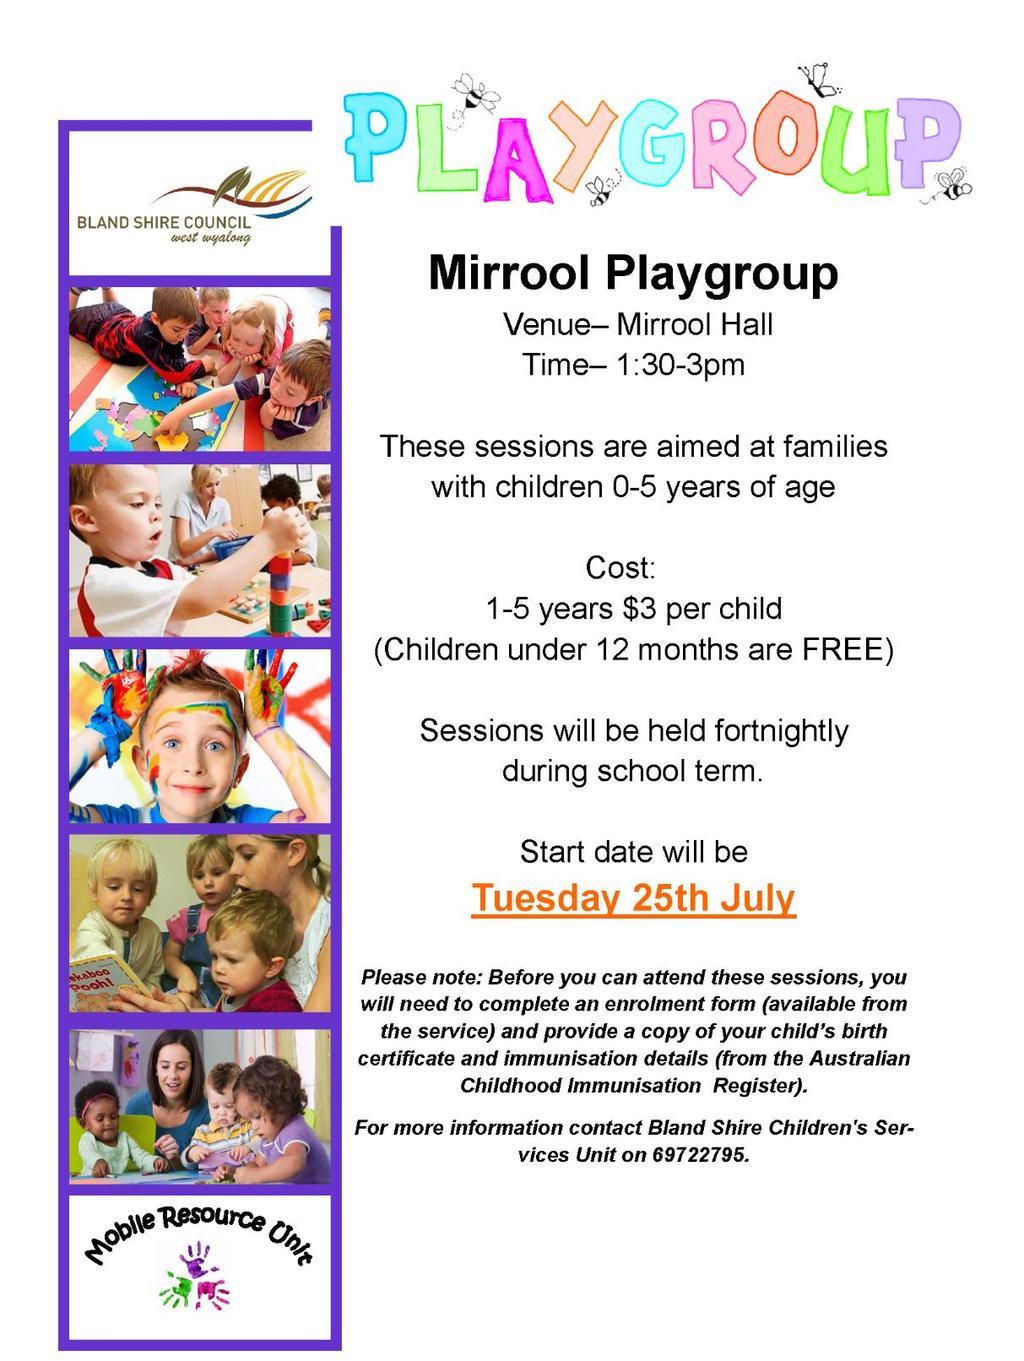 Mirrool ITAV will be on Wednesday 9th August at Mirrool Park at 10:30am. We will be making small pallet chalk paintings.